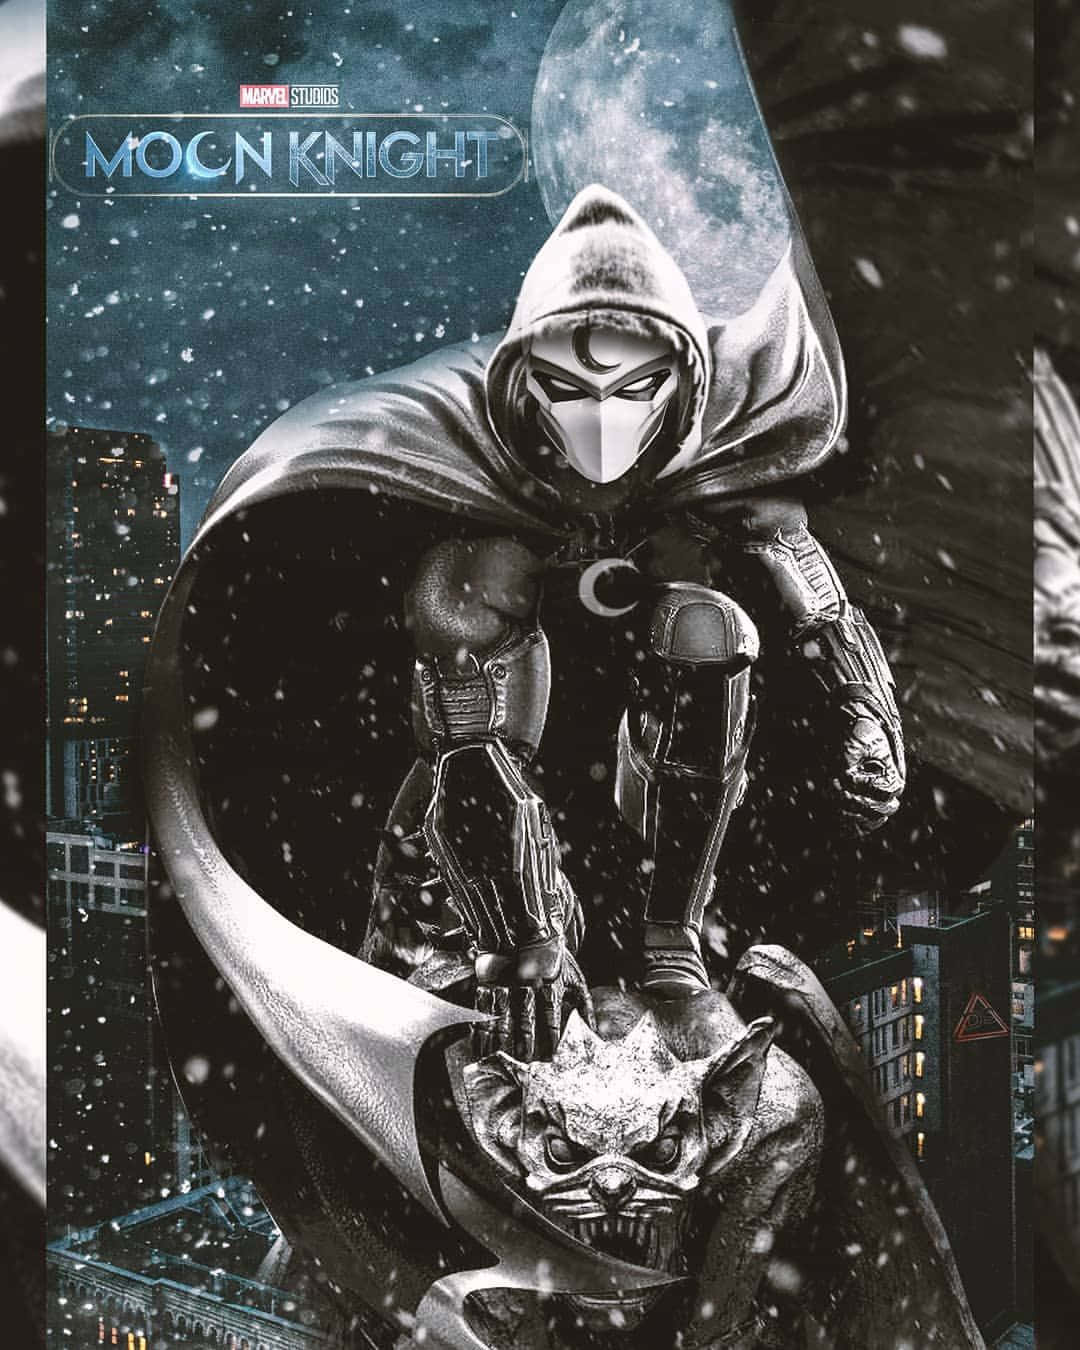 Moon Knight stands vigilant against the dark forces